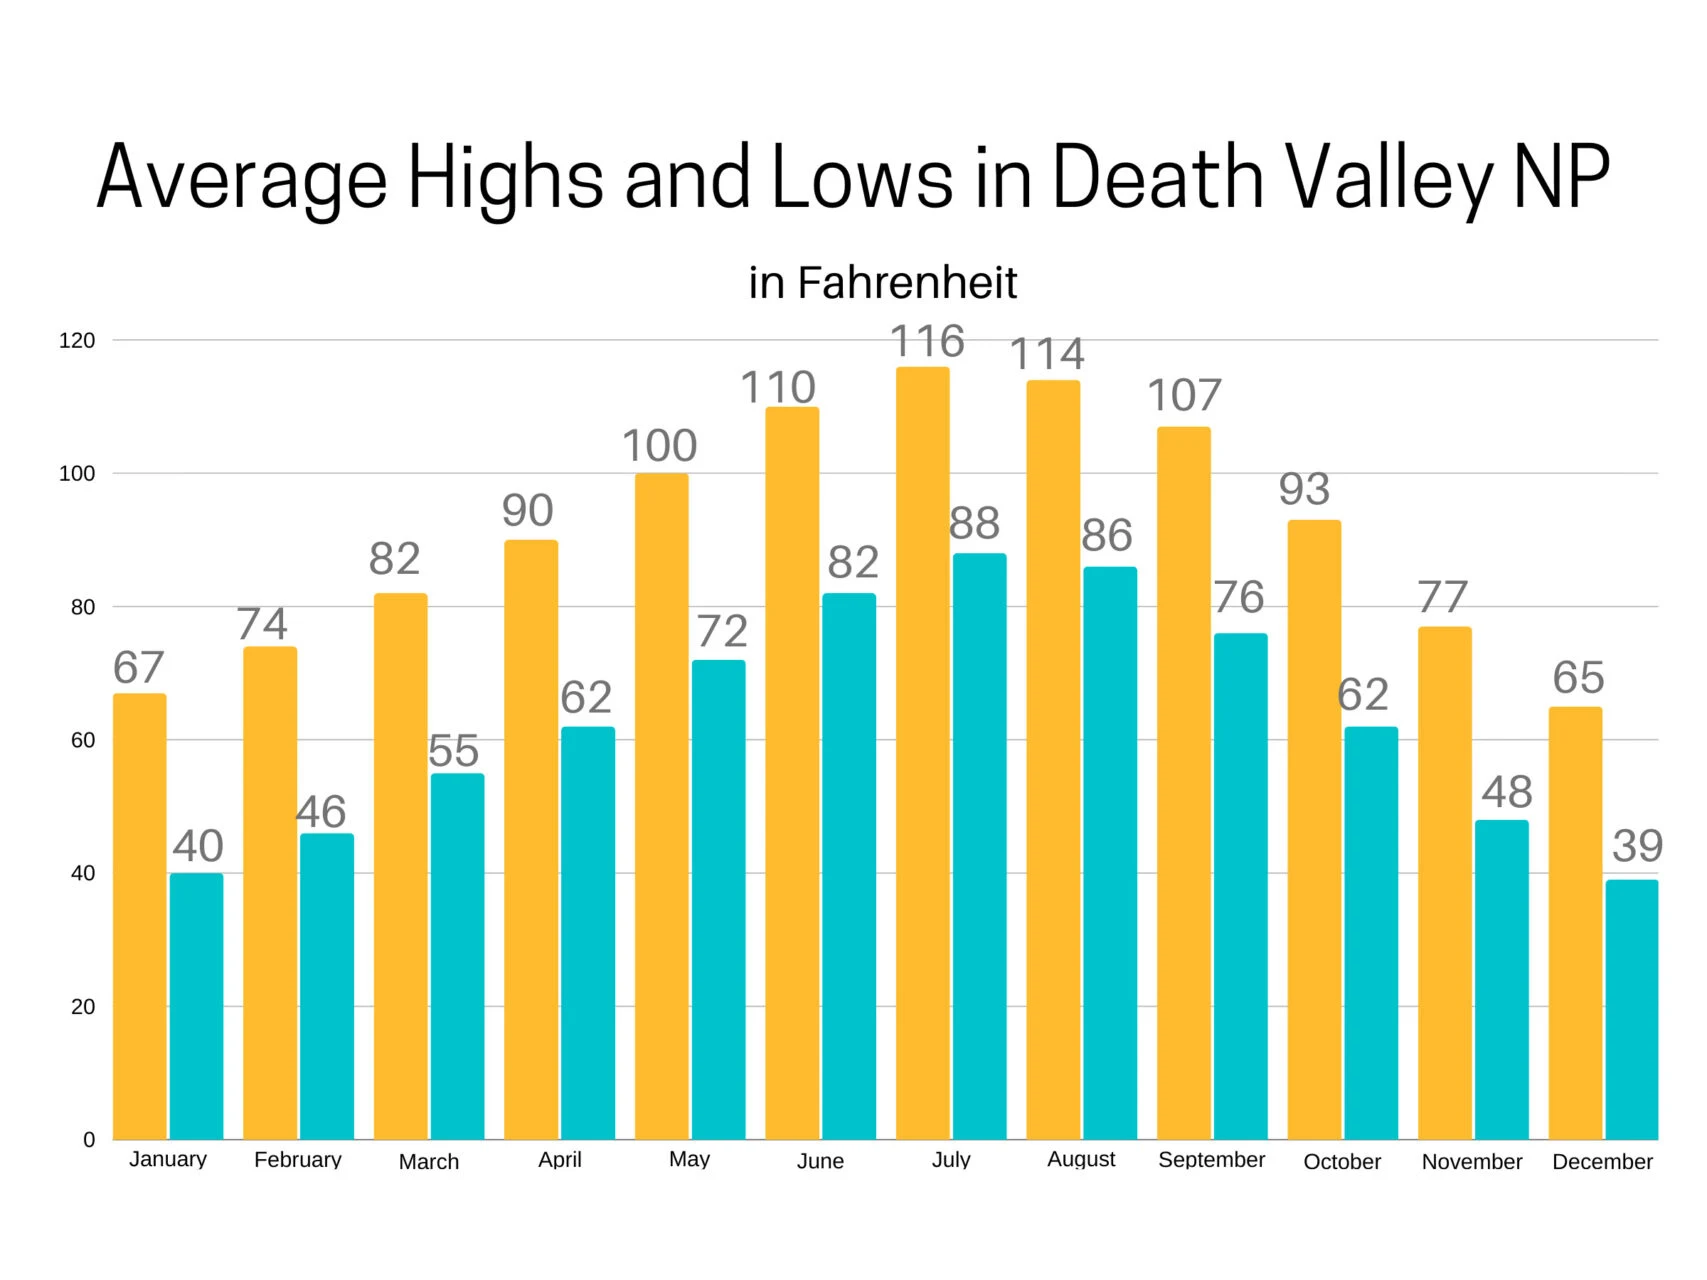 Average annual temperatures describe the hot weather in Death Valley National Park.